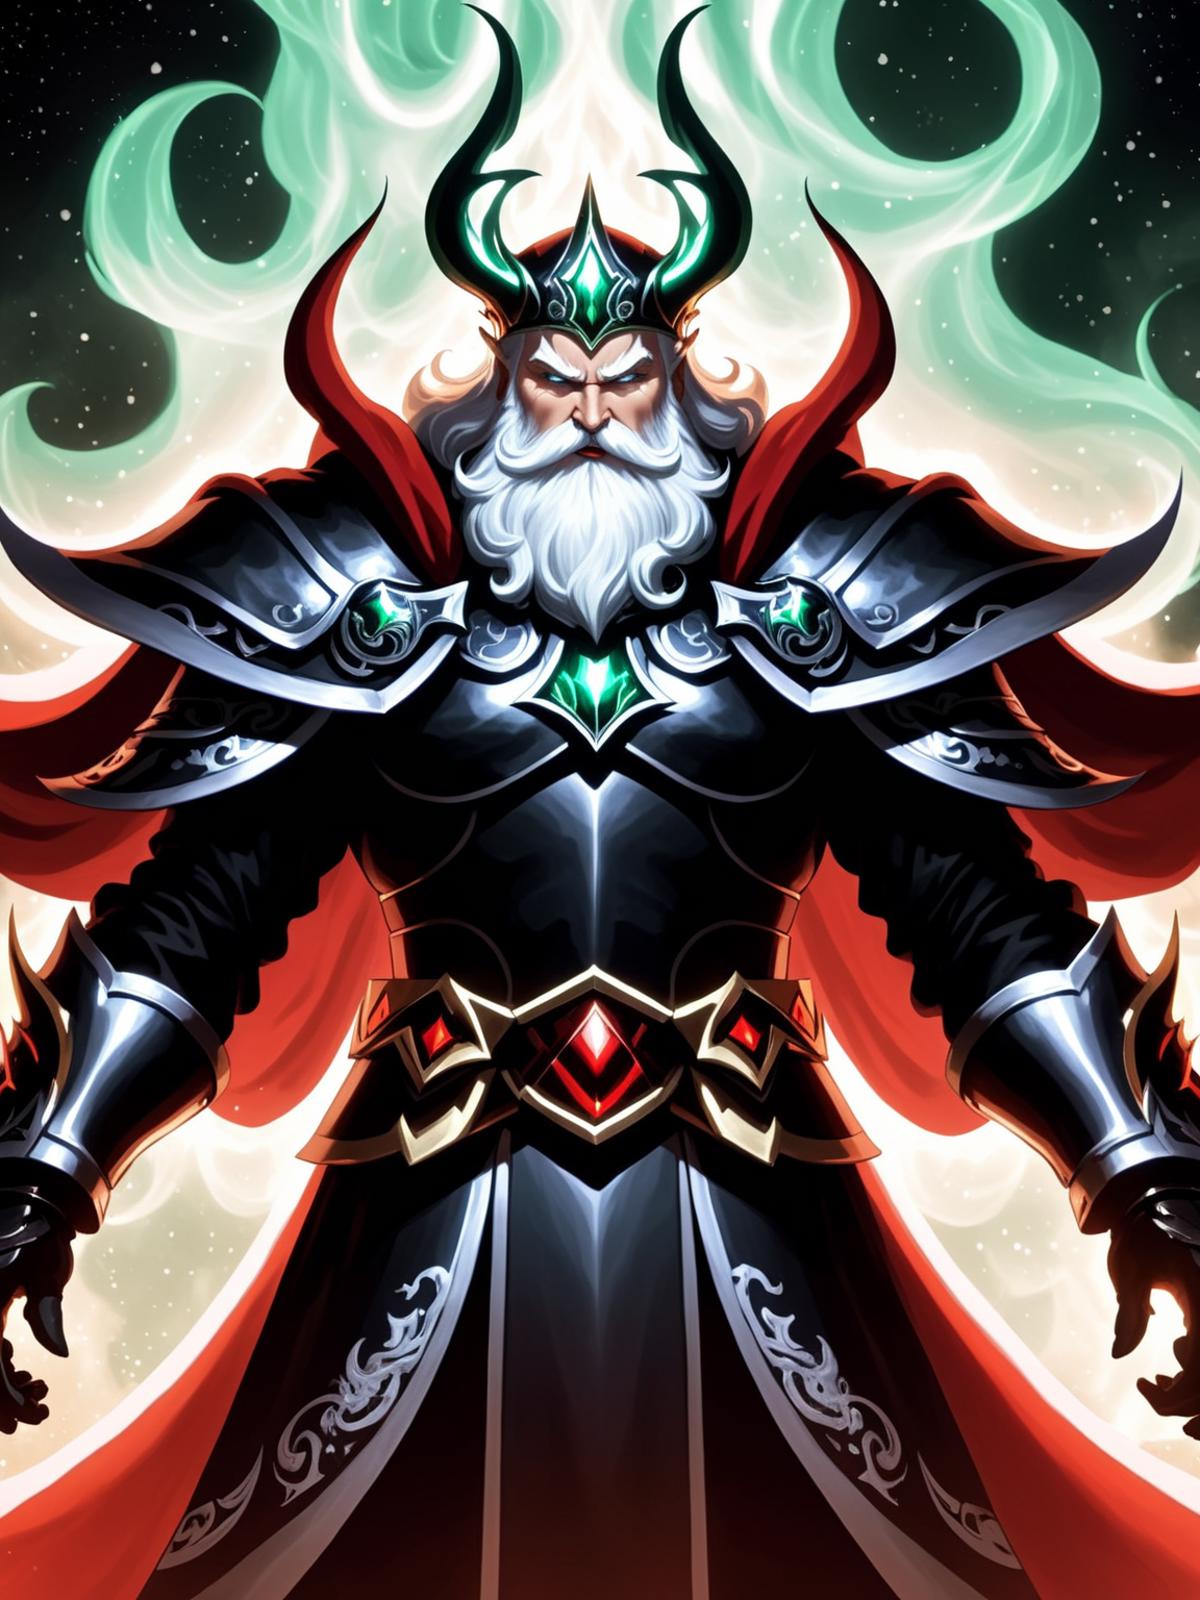 A powerful fantasy warrior wearing a Santa Claus hat and a black armor.